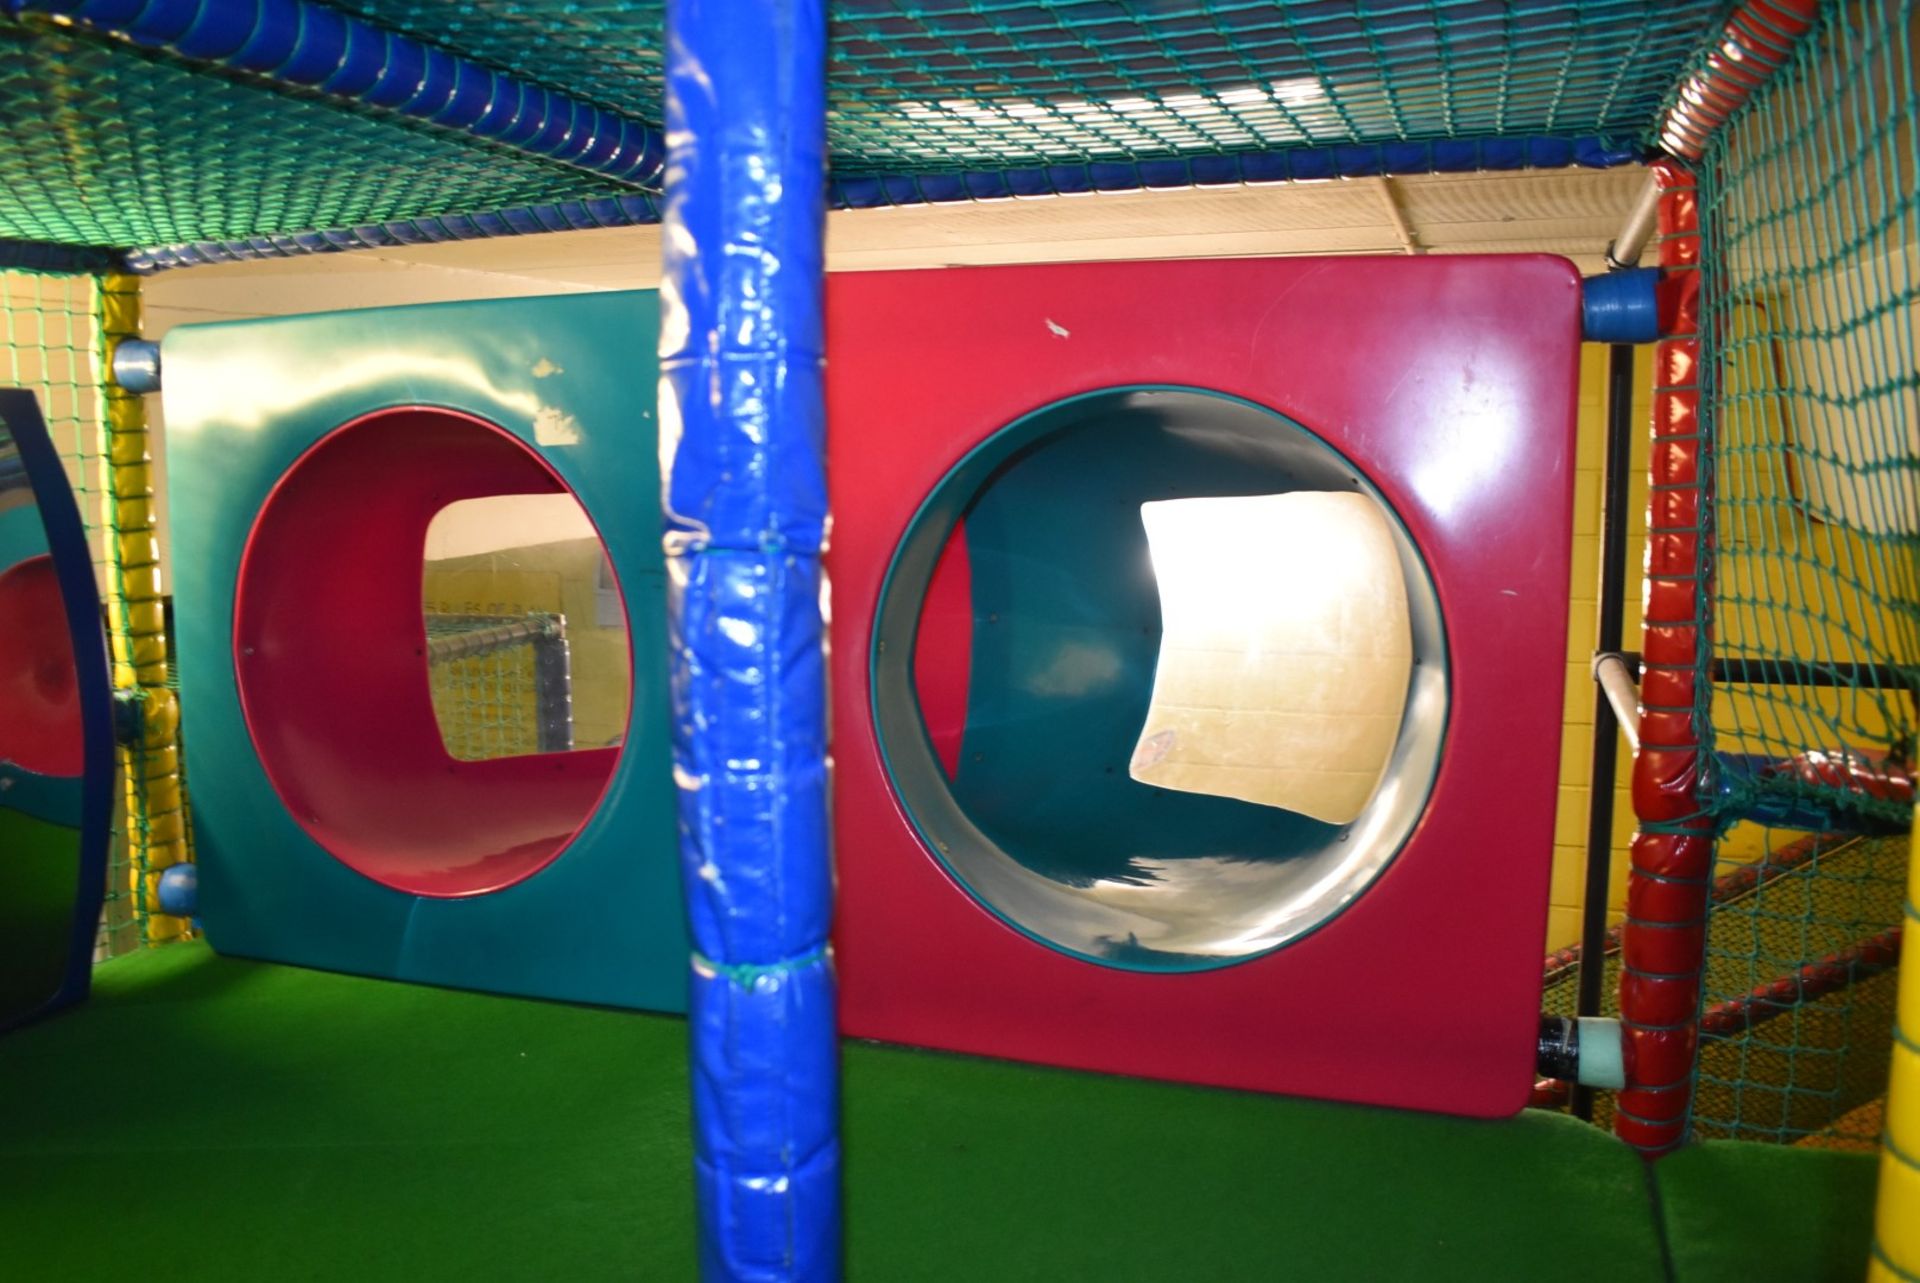 Bramleys Big Adventure Playground - Giant Action-Packed Playcentre With Slides, Zip Line Swings, - Image 93 of 99